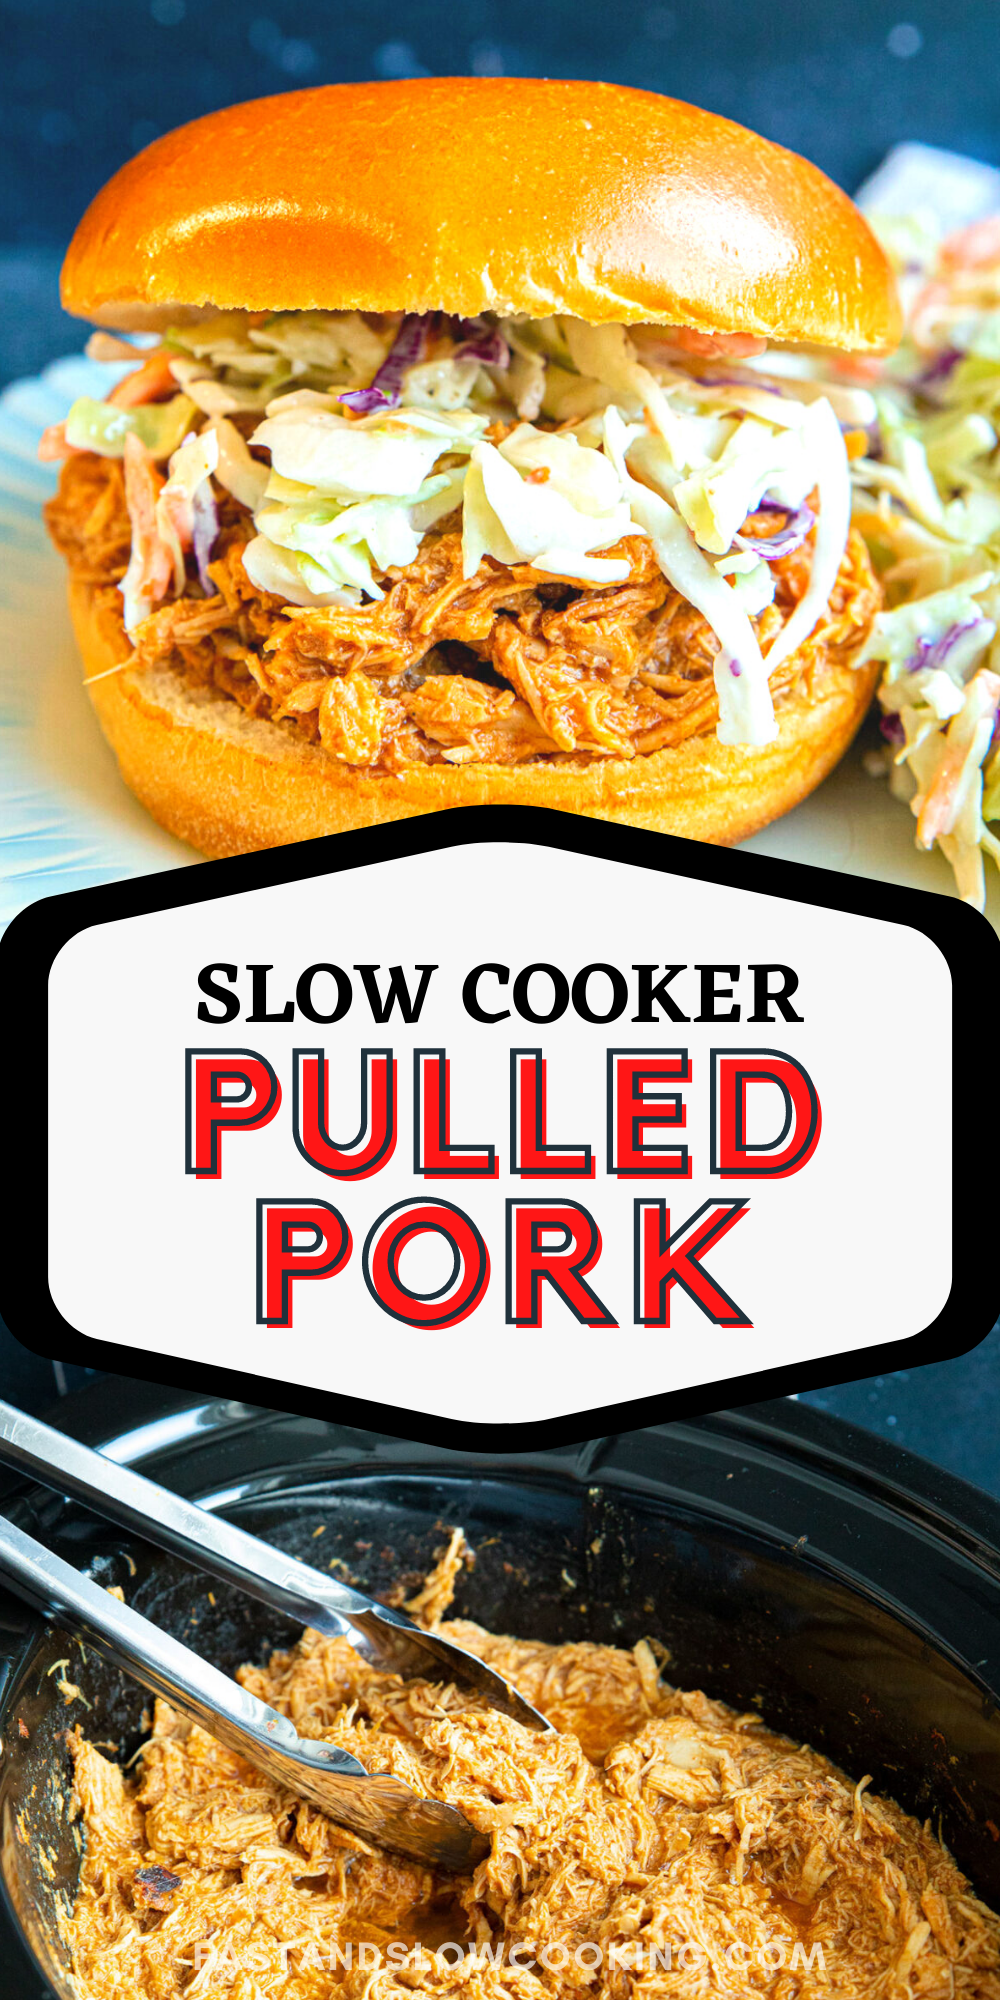 Simple slow cooker pulled pork either by itself or on a bun is a great dinner / lunch that your family will love.
